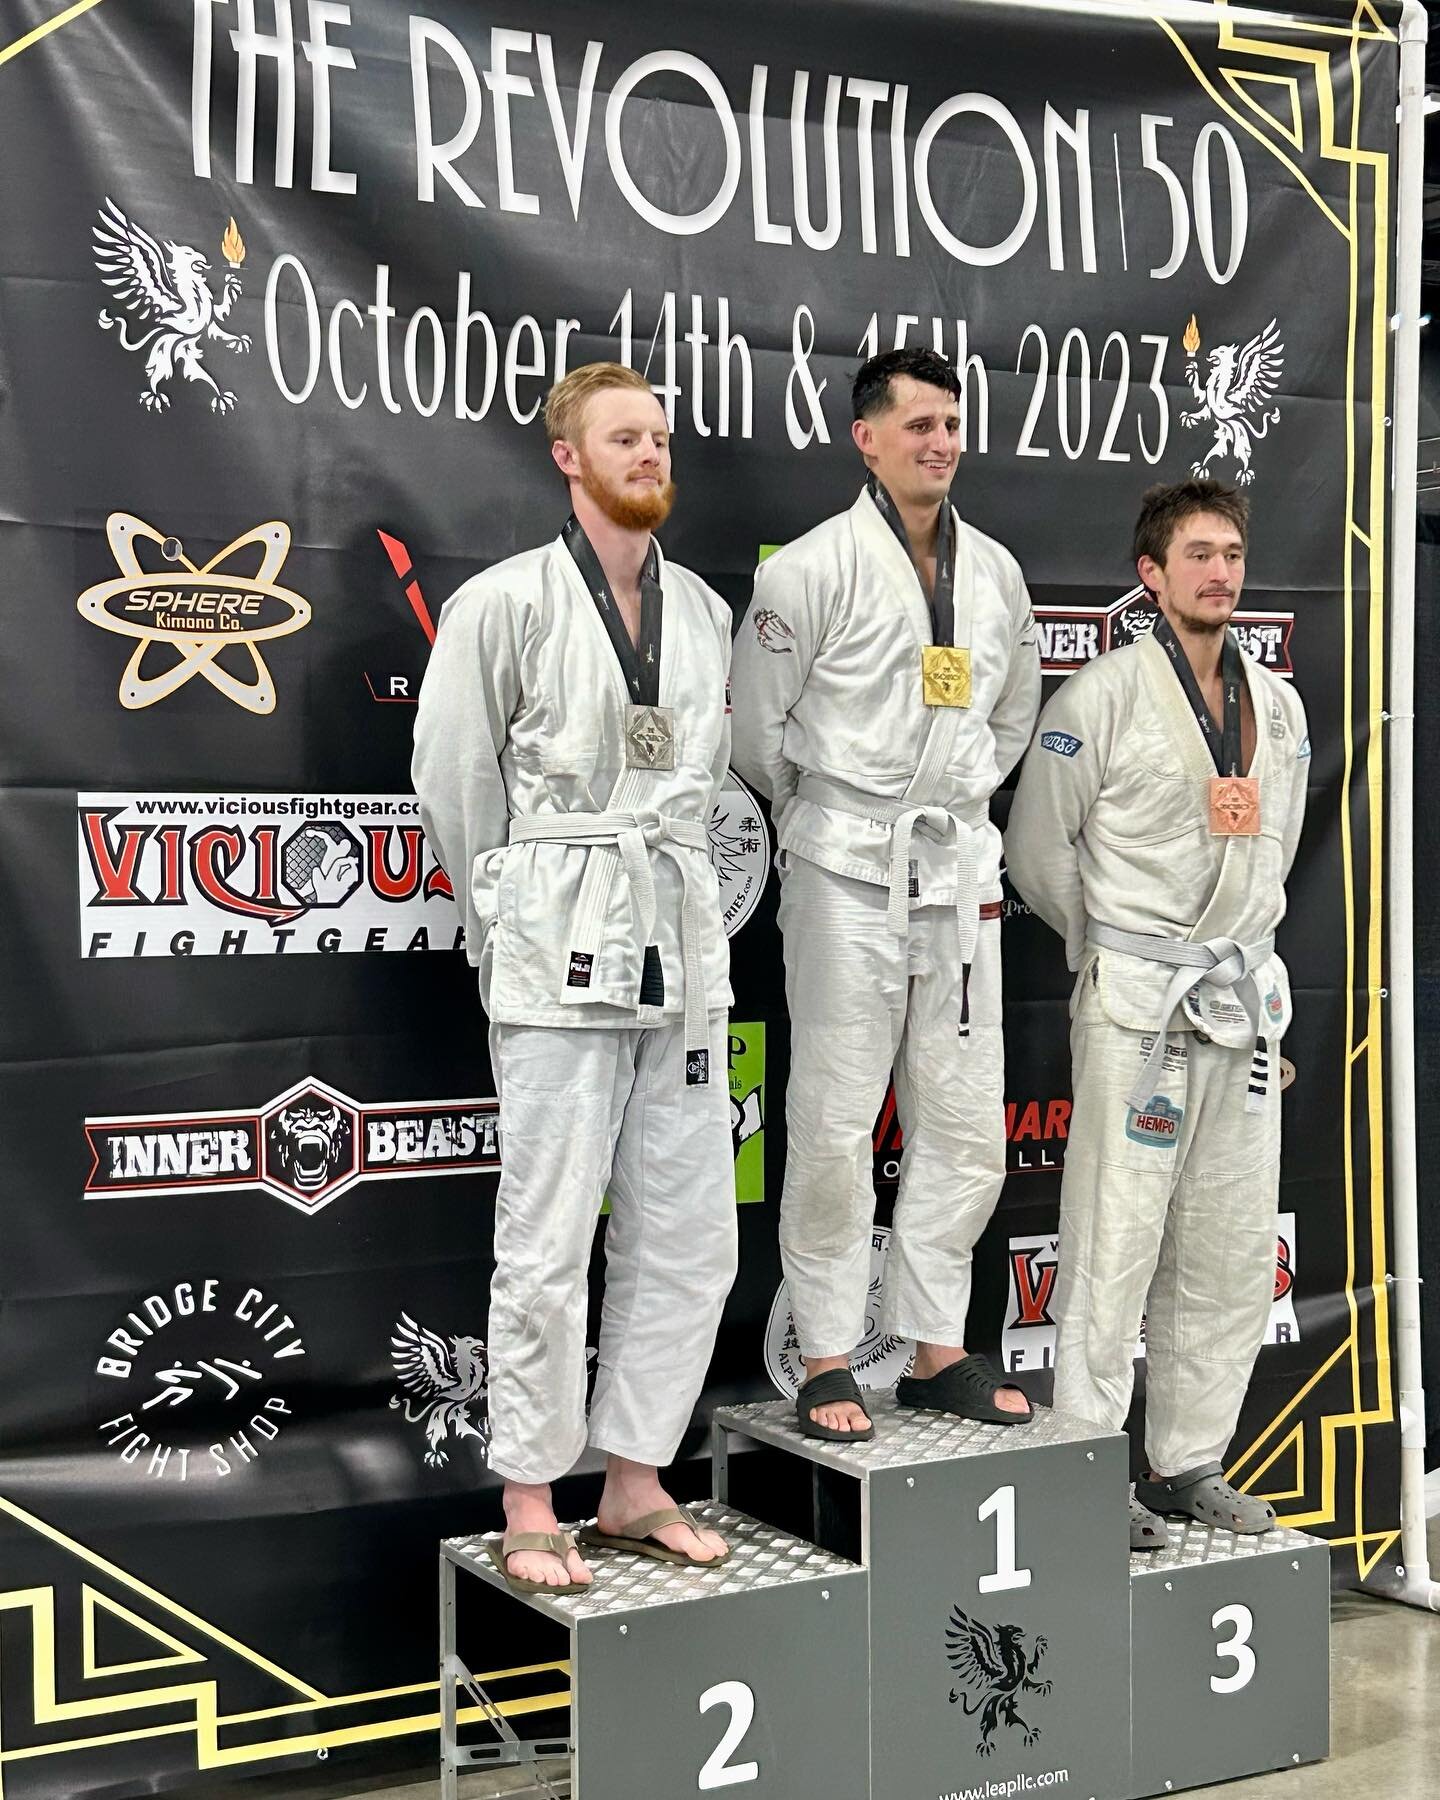 Very proud of everyone that had the courage to step on the mats and compete yesterday @bjjrevolutionteampb 50. Big congrats to Nate who got 🥈 in Gi and Eddie who got 🥇 in No-Gi. @jankcumduhcan and Patrick fought hard in their matches but ultimately